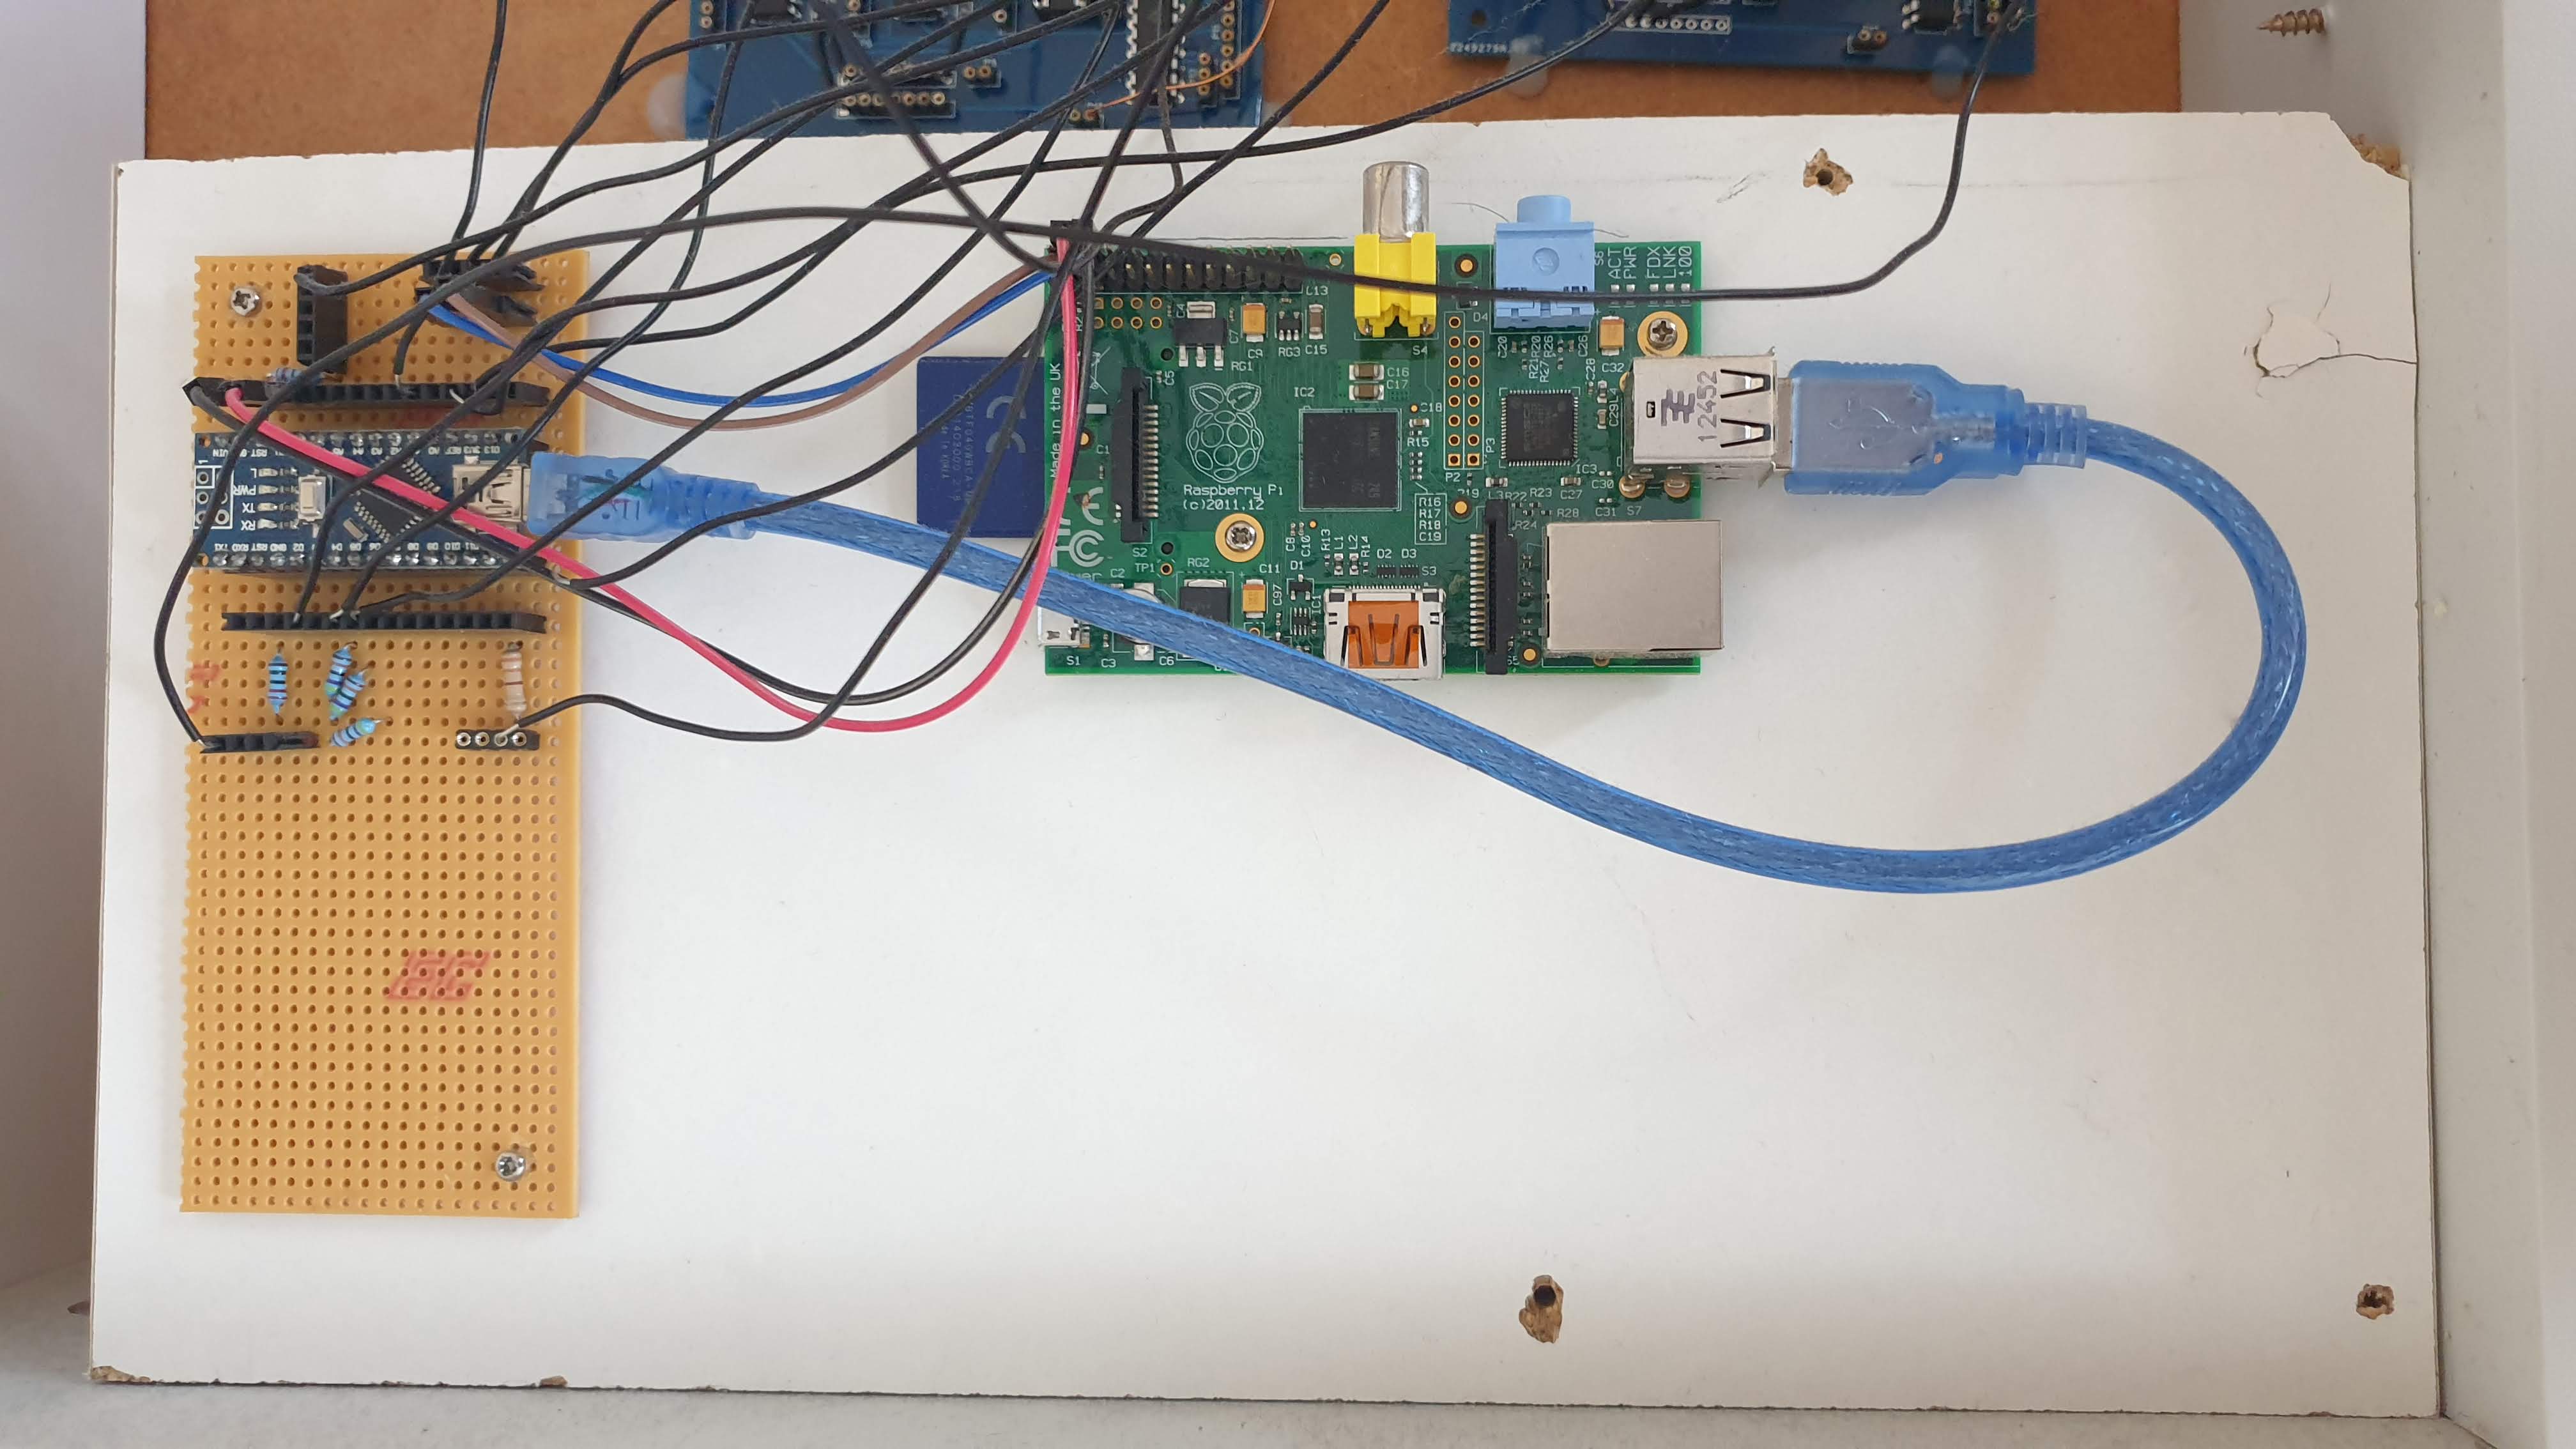 Image of stripboard with Arduino installed in box